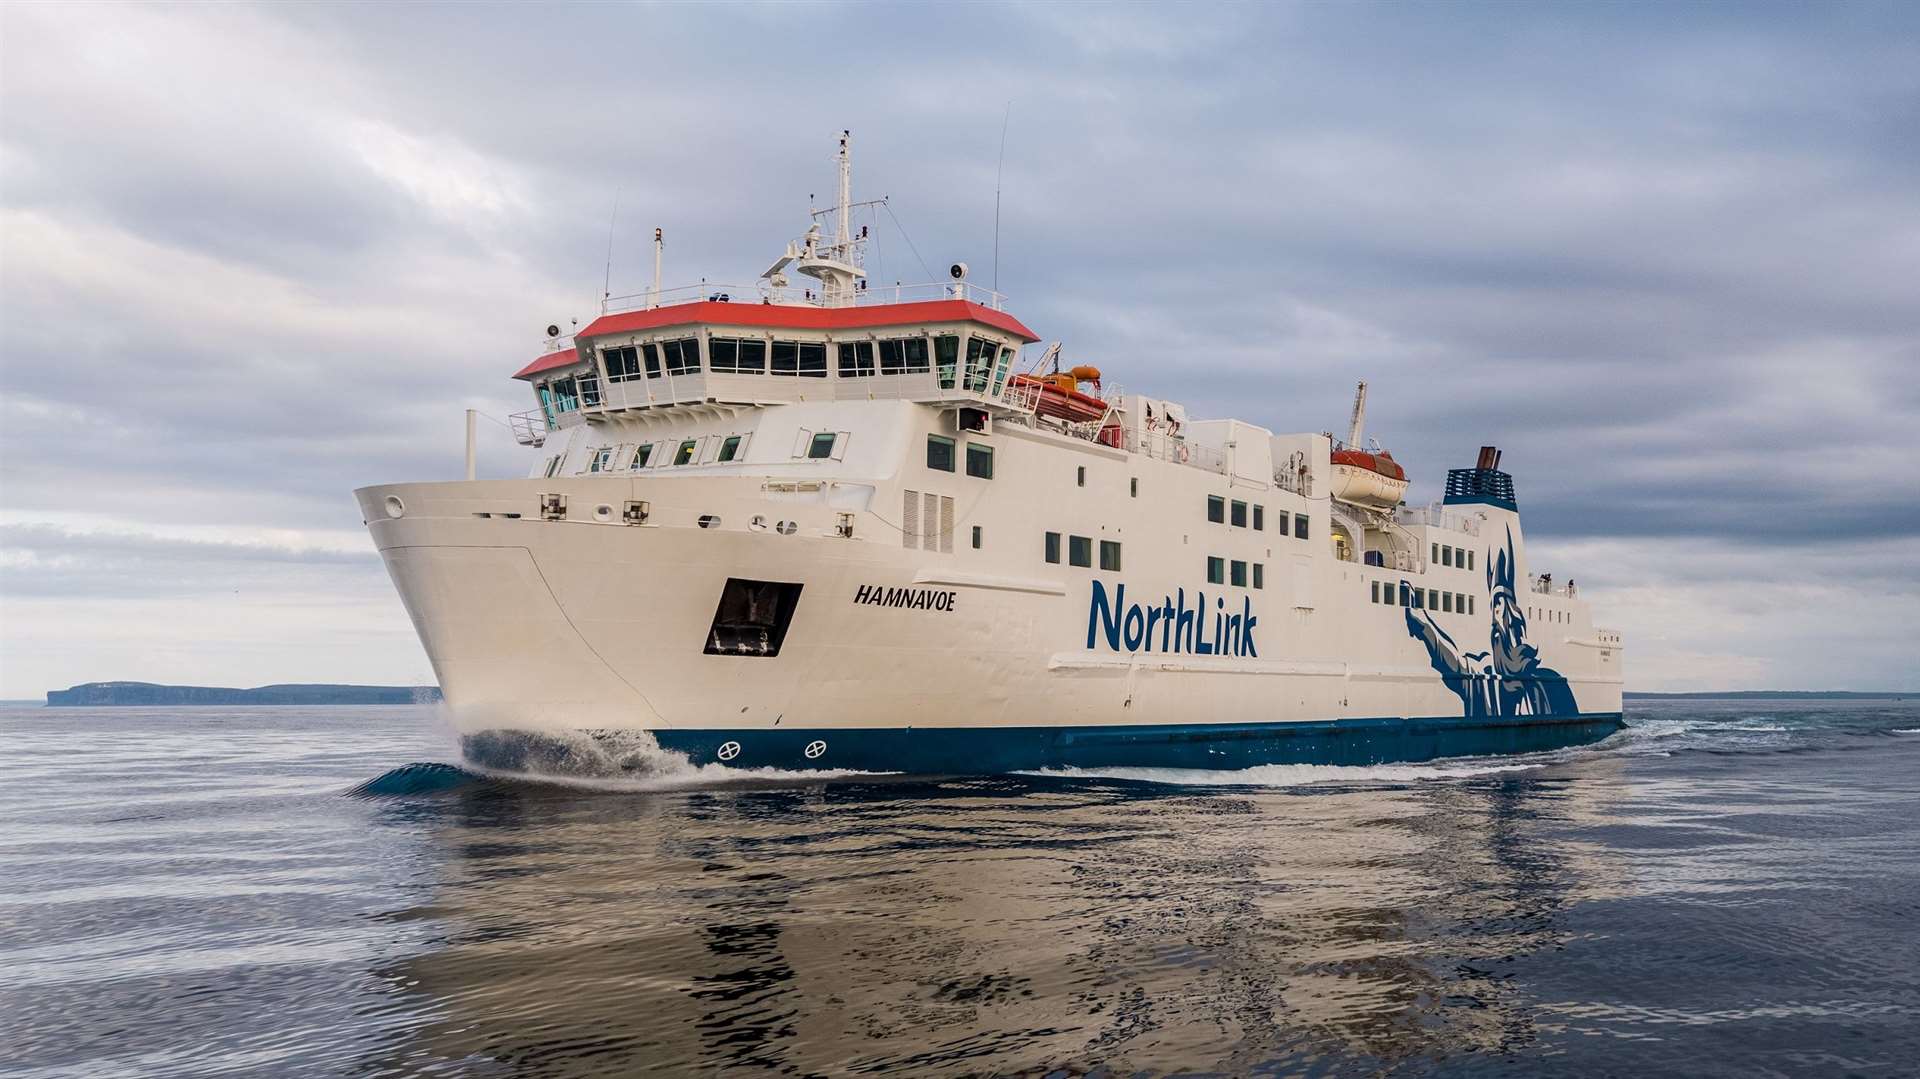 The Hamnavoe will make an extra return crossing on the Scrabster/Stromness route on Friday, Saturday and Monday evenings. Picture: NorthLink Ferries